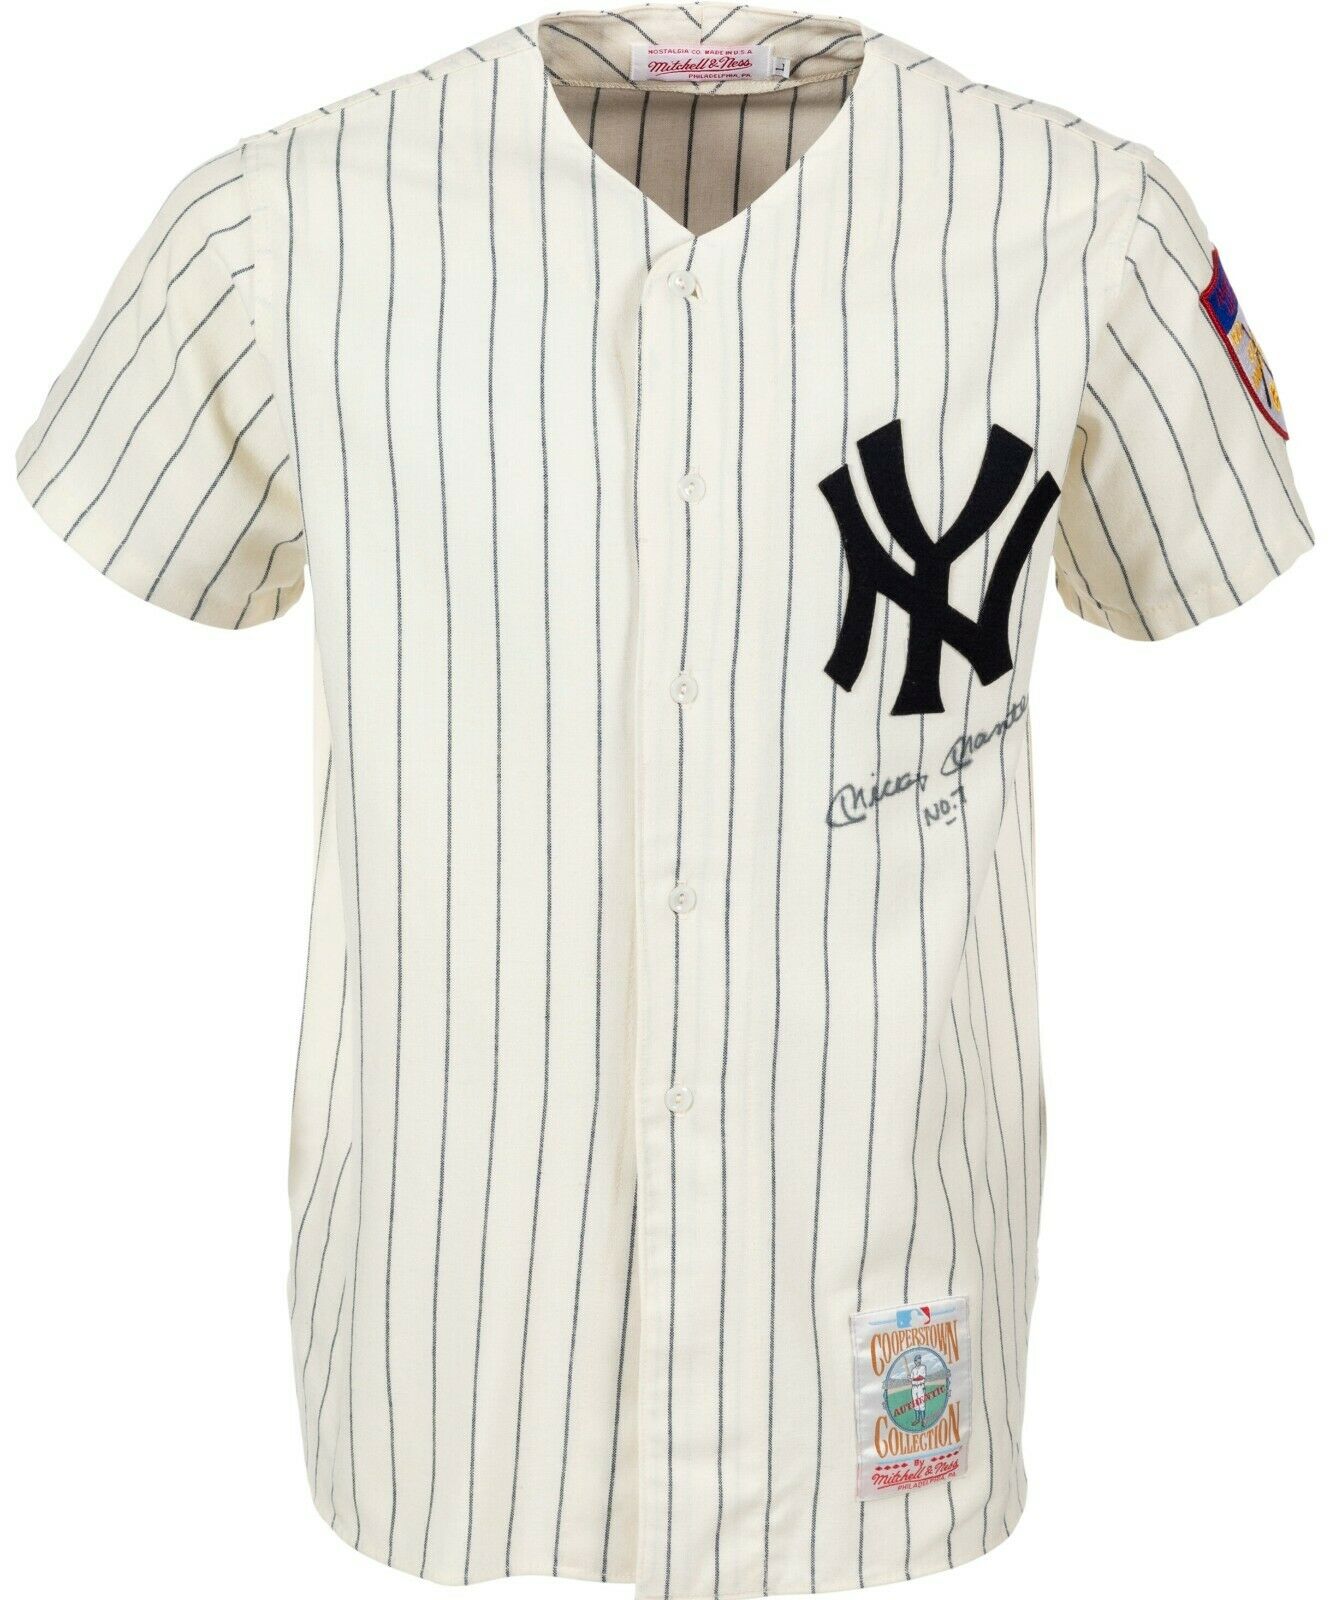 Mickey Mantle Signed 1952 New York Yankees Mitchell & Ness Jersey